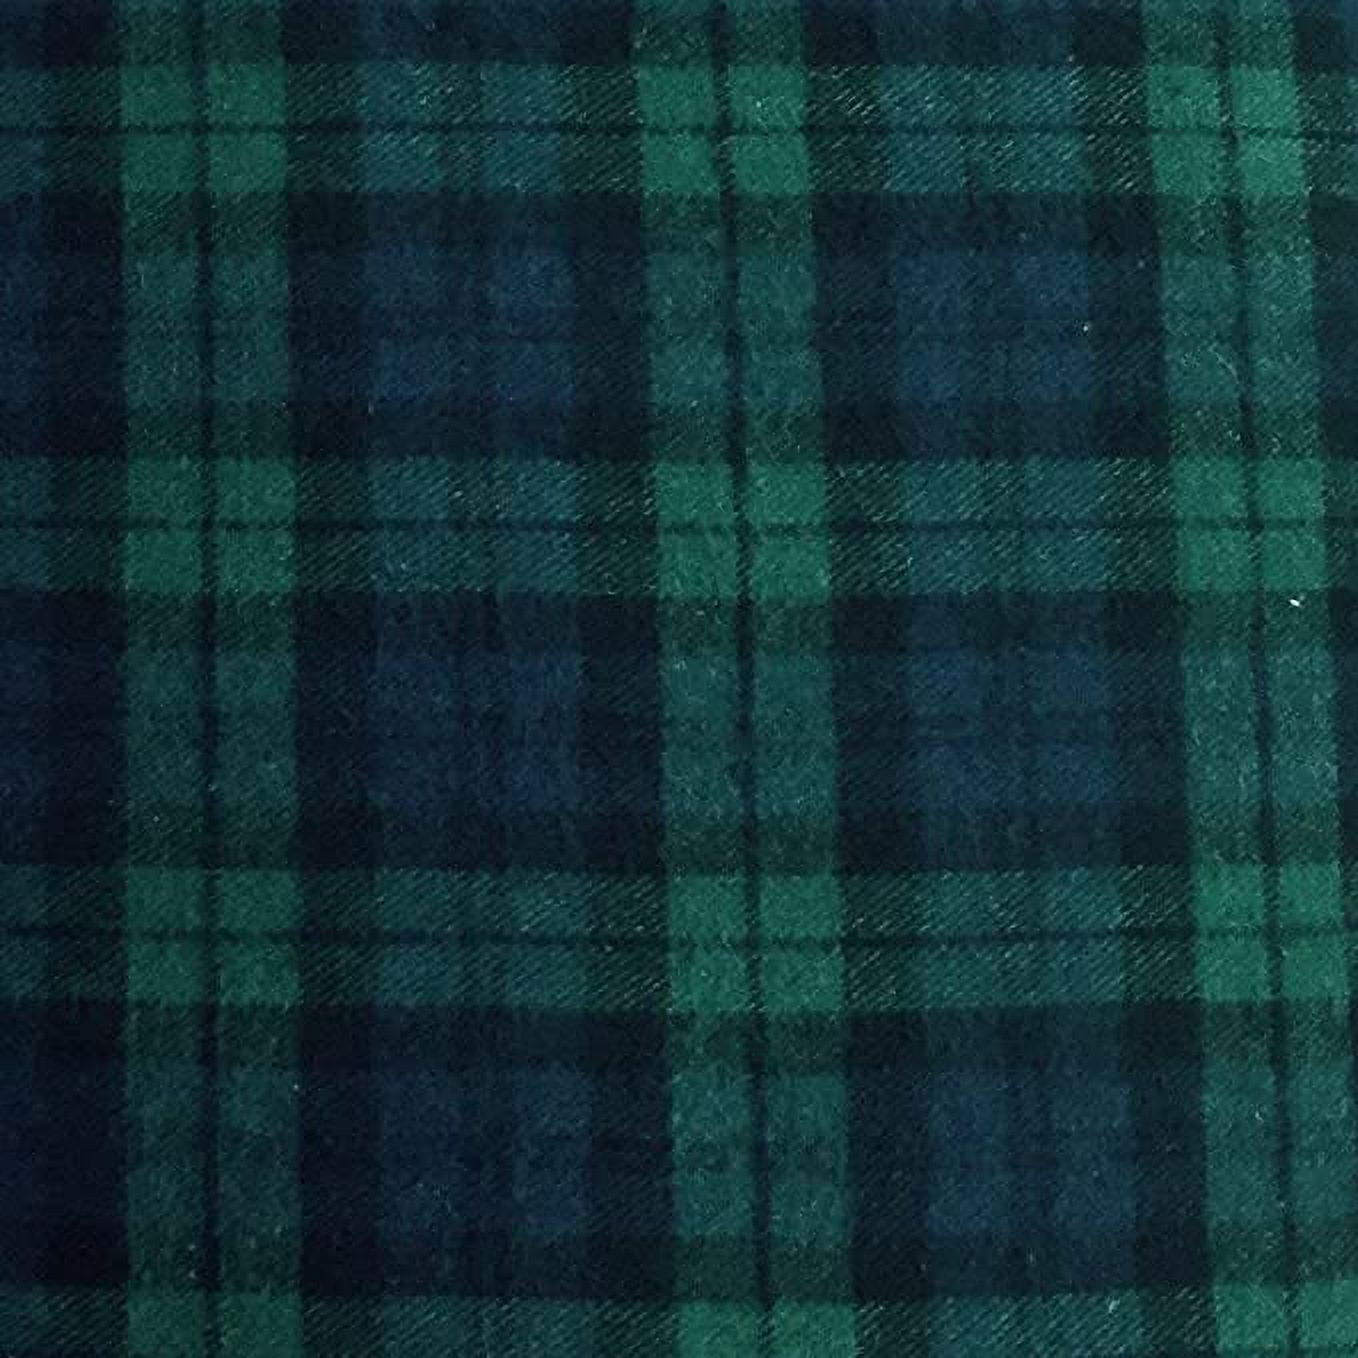 FabricLA 100% Cotton Flannel Fabric - 58/60 Inches (150 CM) Extra Wide  Flannel Fabric - Cotton Tartan Flannel Fabric - Use as Blanket,  Pillowcases, Quilting, Sewing, PJ, Shirt 